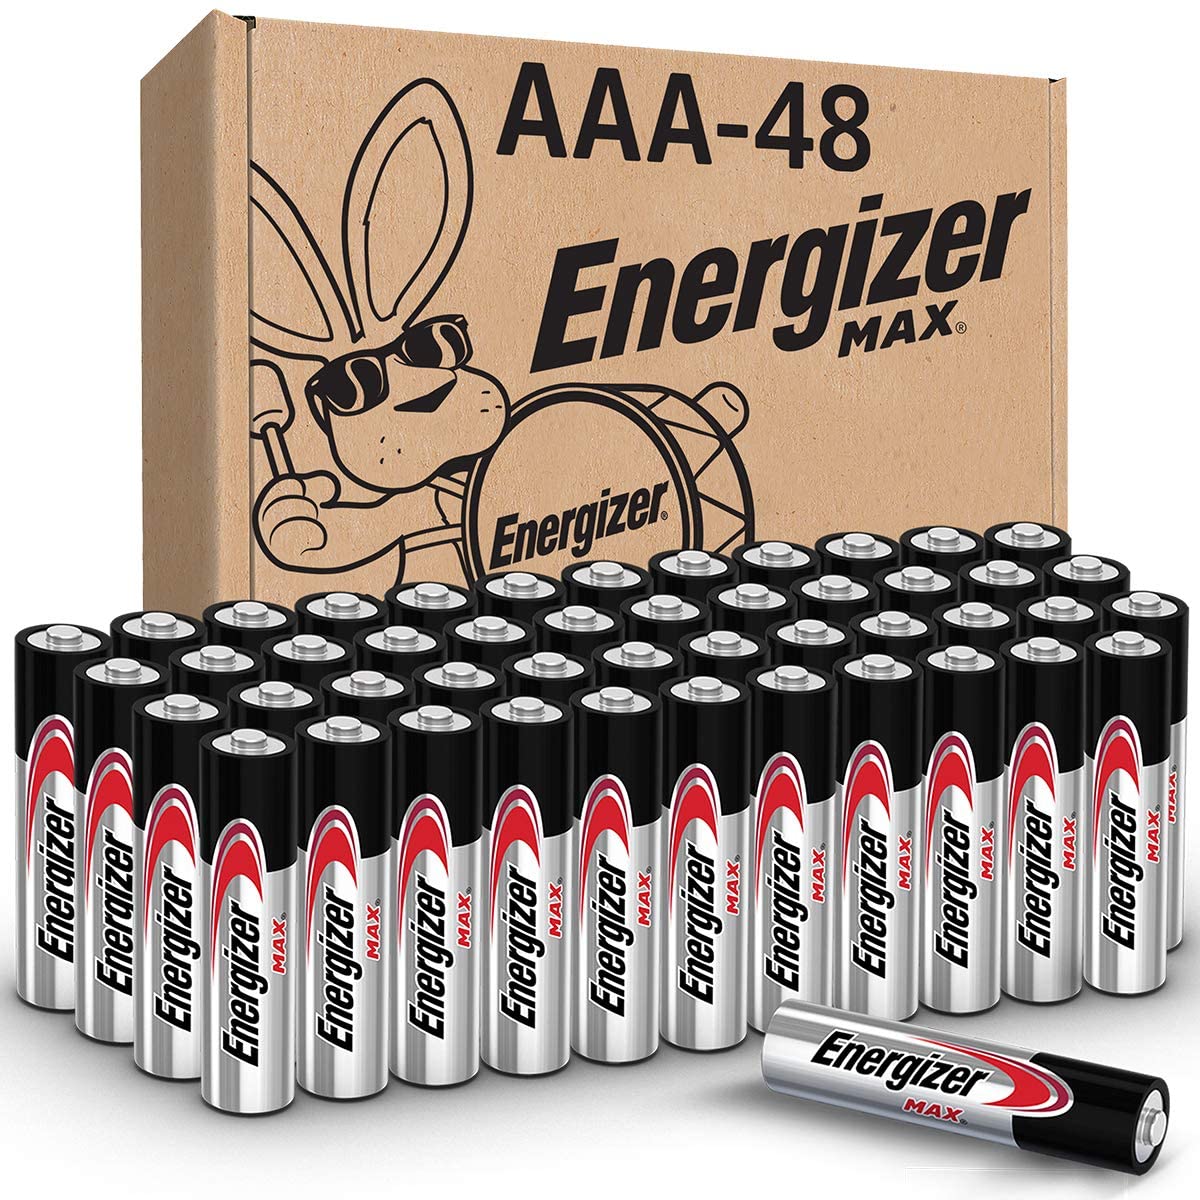 Energizer AAA Batteries (48 Count), Triple A Max Alkaline Battery $15.94